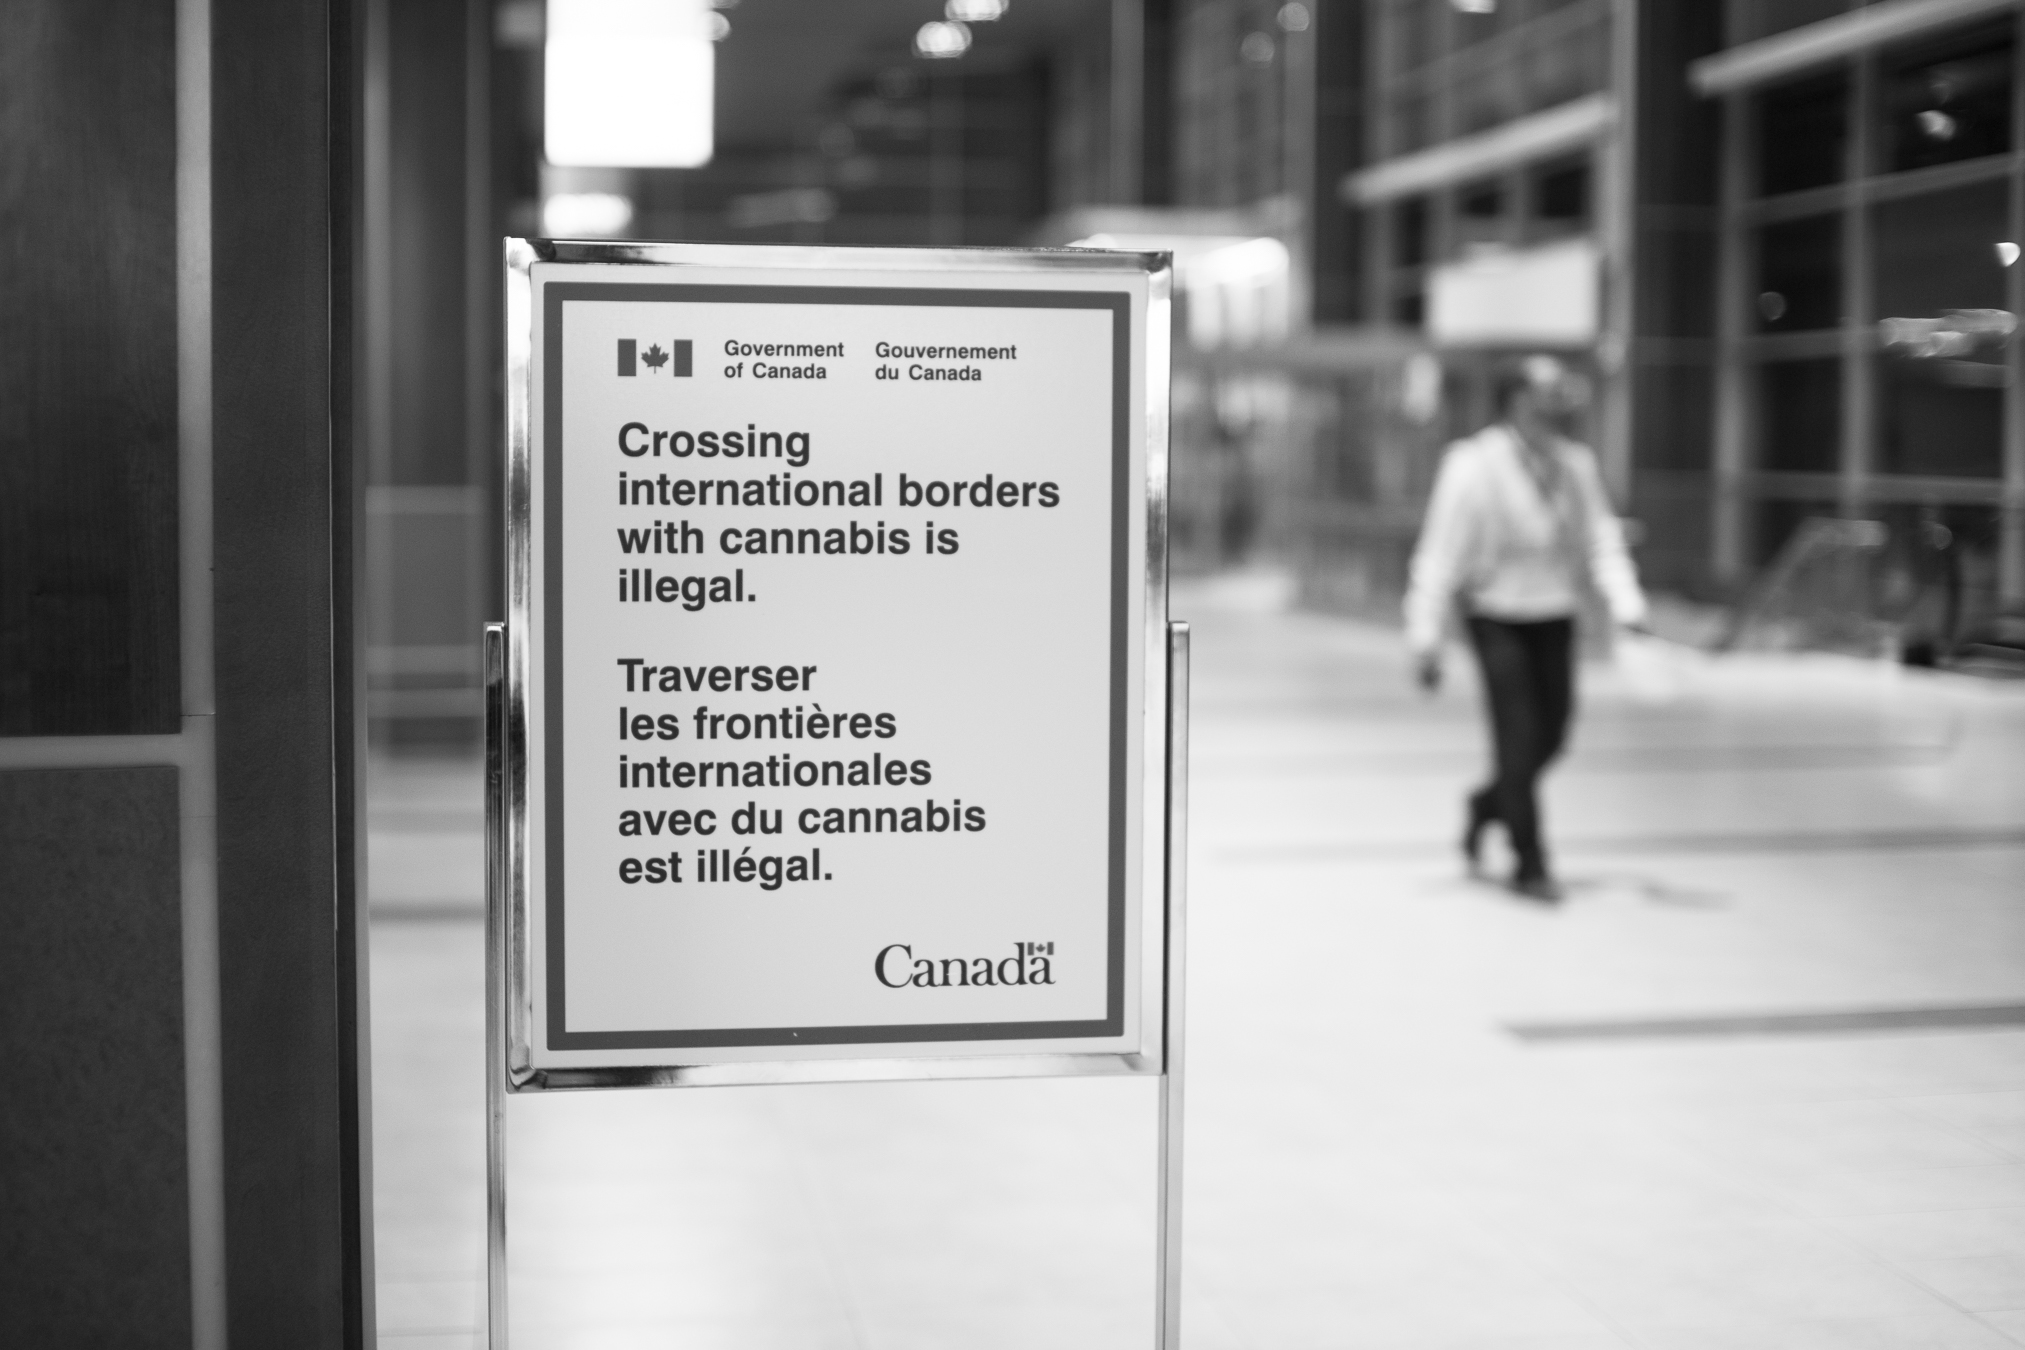 Just a Friendly reminder from the Canadian Government - Stanfield International Airport - Enfield, NS